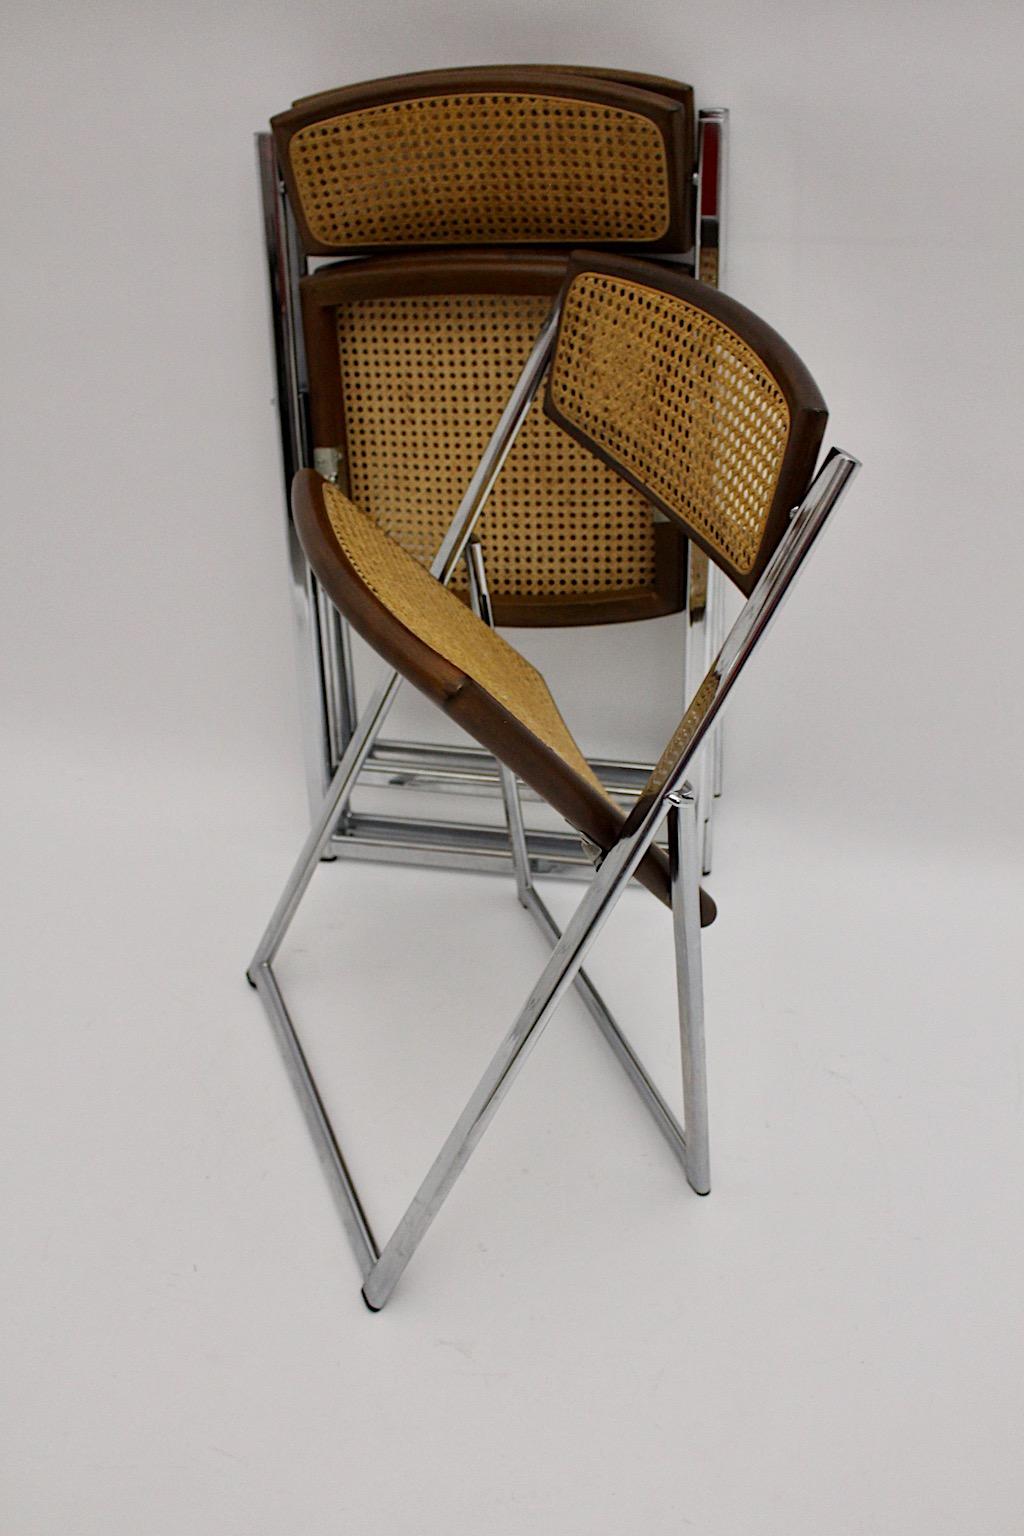 Modernist Organic Vintage Three Foldable Dining Chairs Beech Mesh Chrome, 1970s For Sale 11